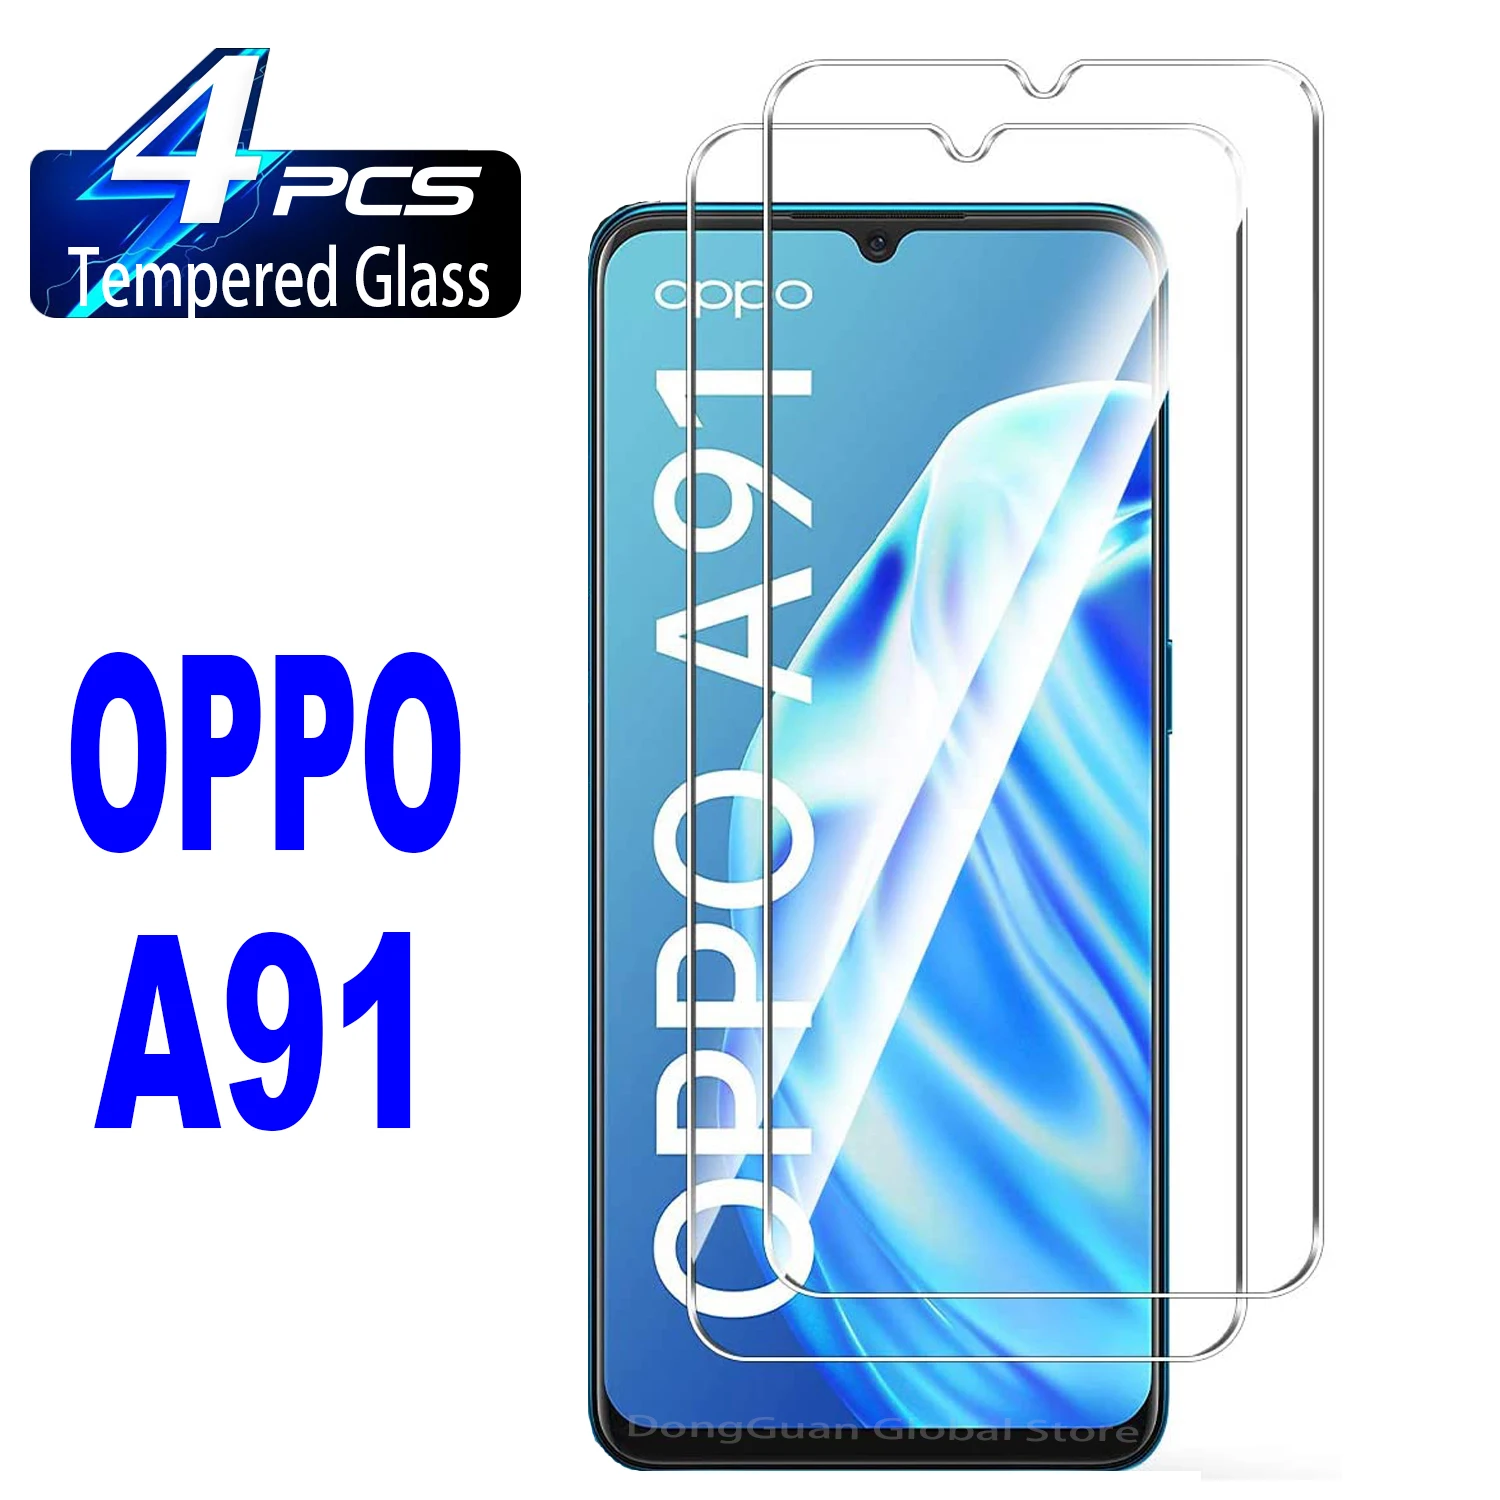 2/4Pcs Tempered Glass For OPPO A91 Screen Protector Glass Film 2 4pcs screen protector glass for oppo a78 tempered glass film